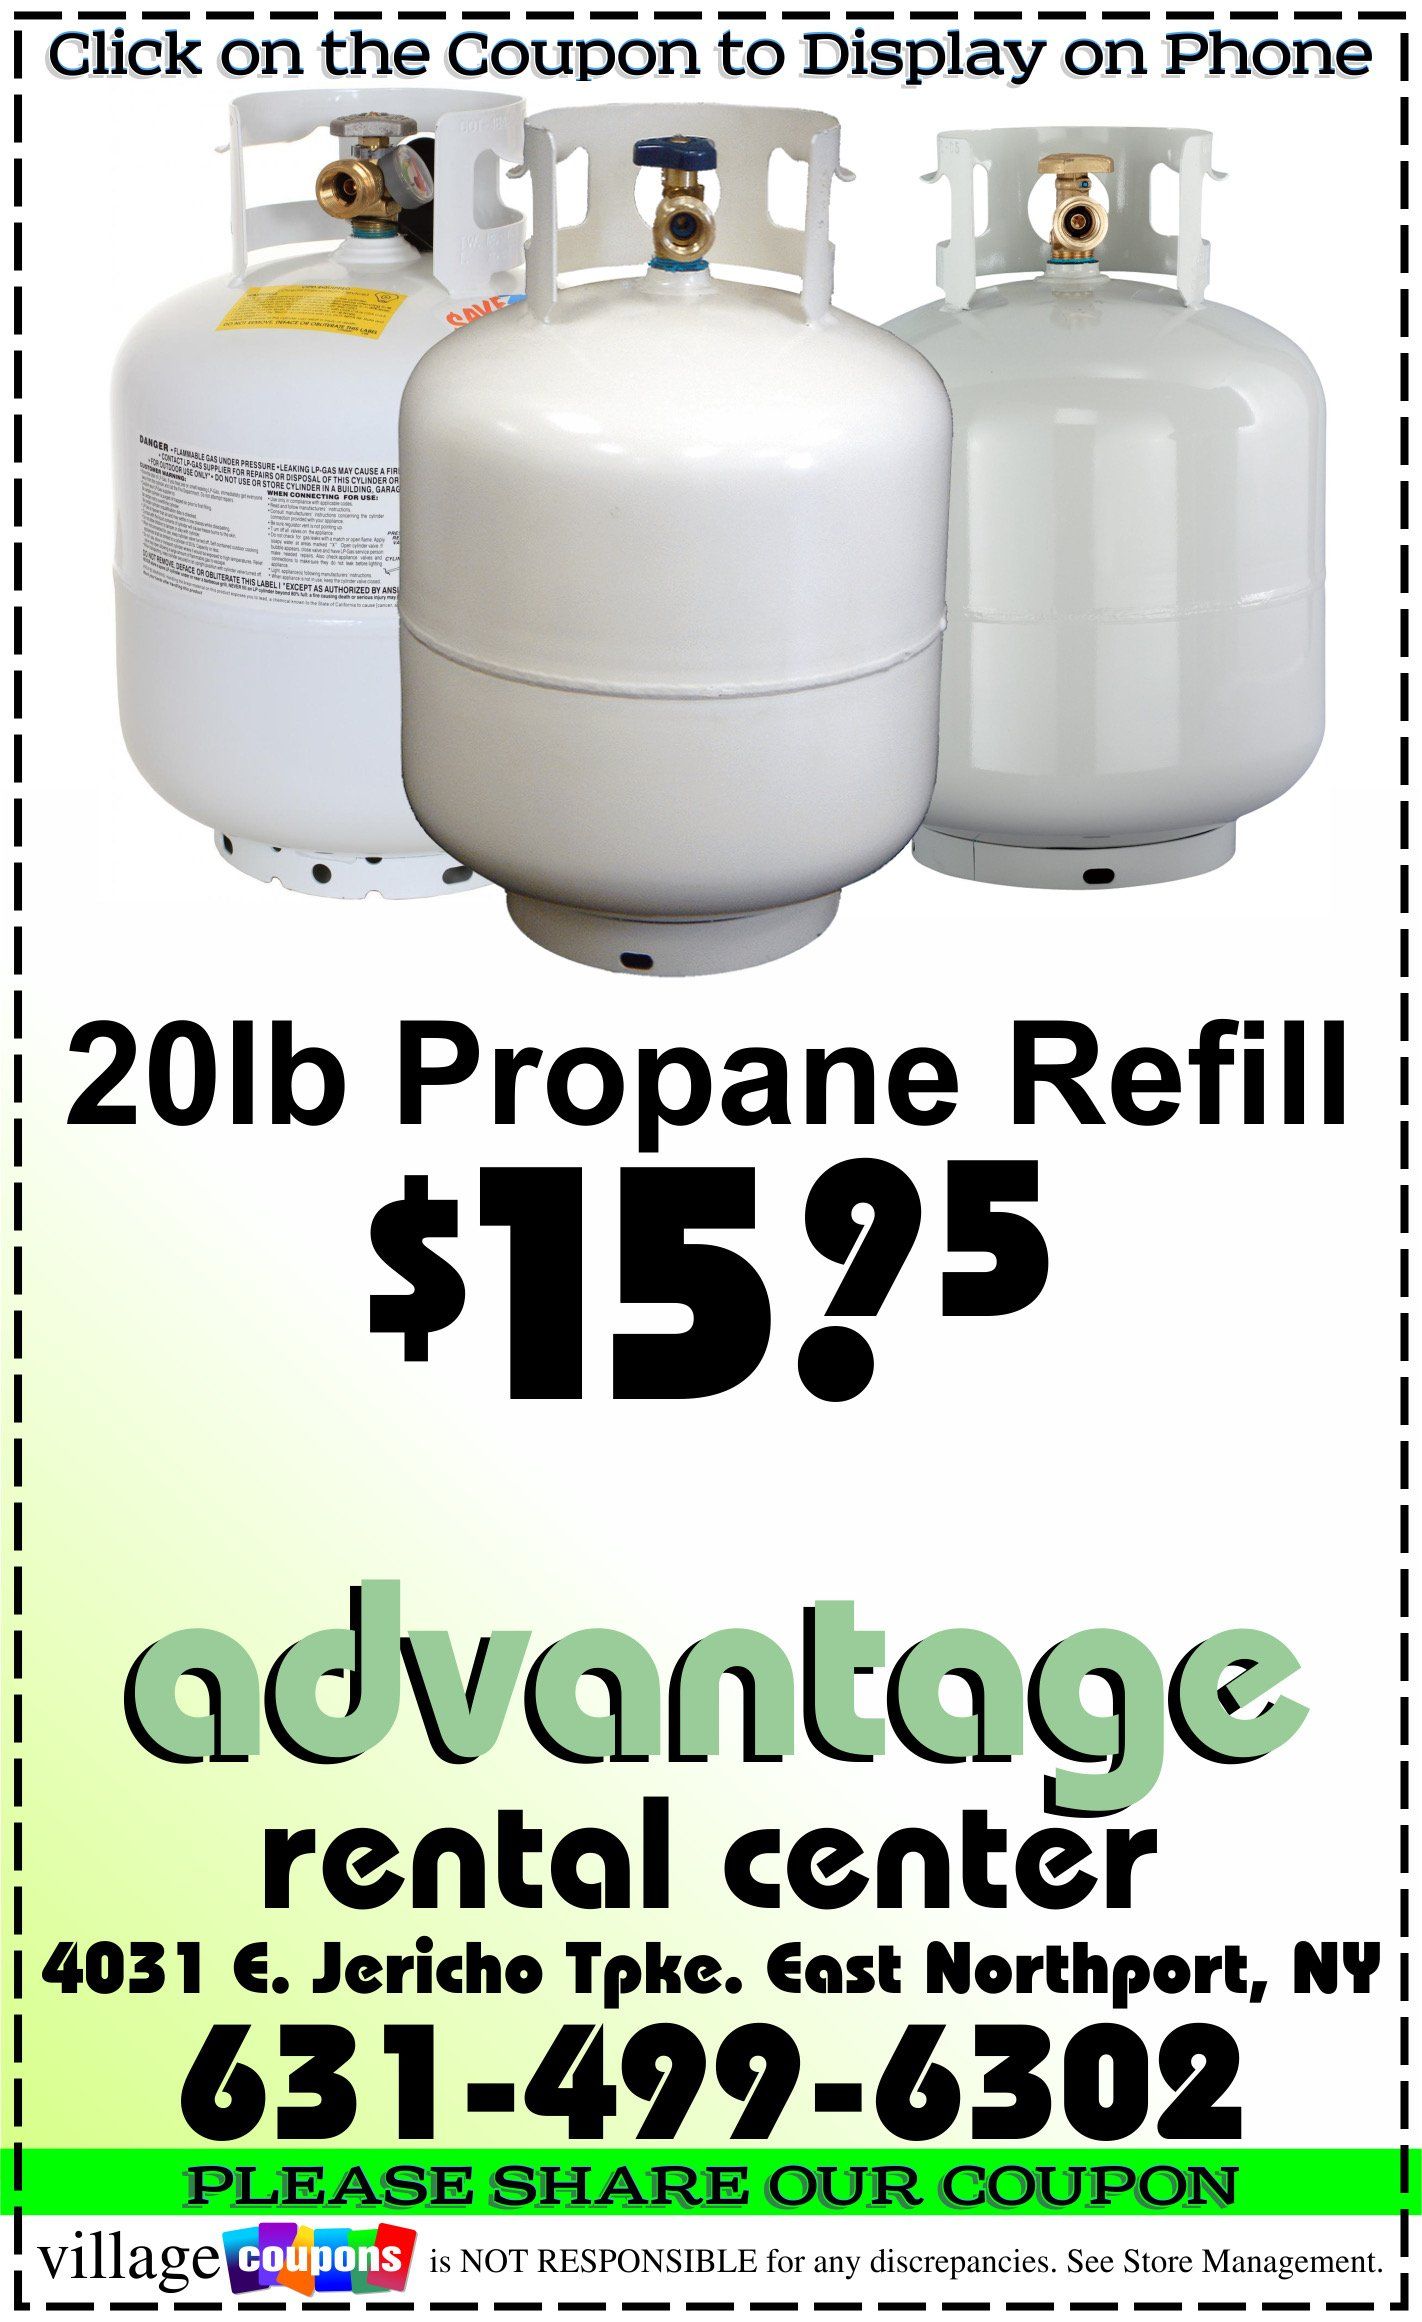 A coupon for propane refills from advantage rental center